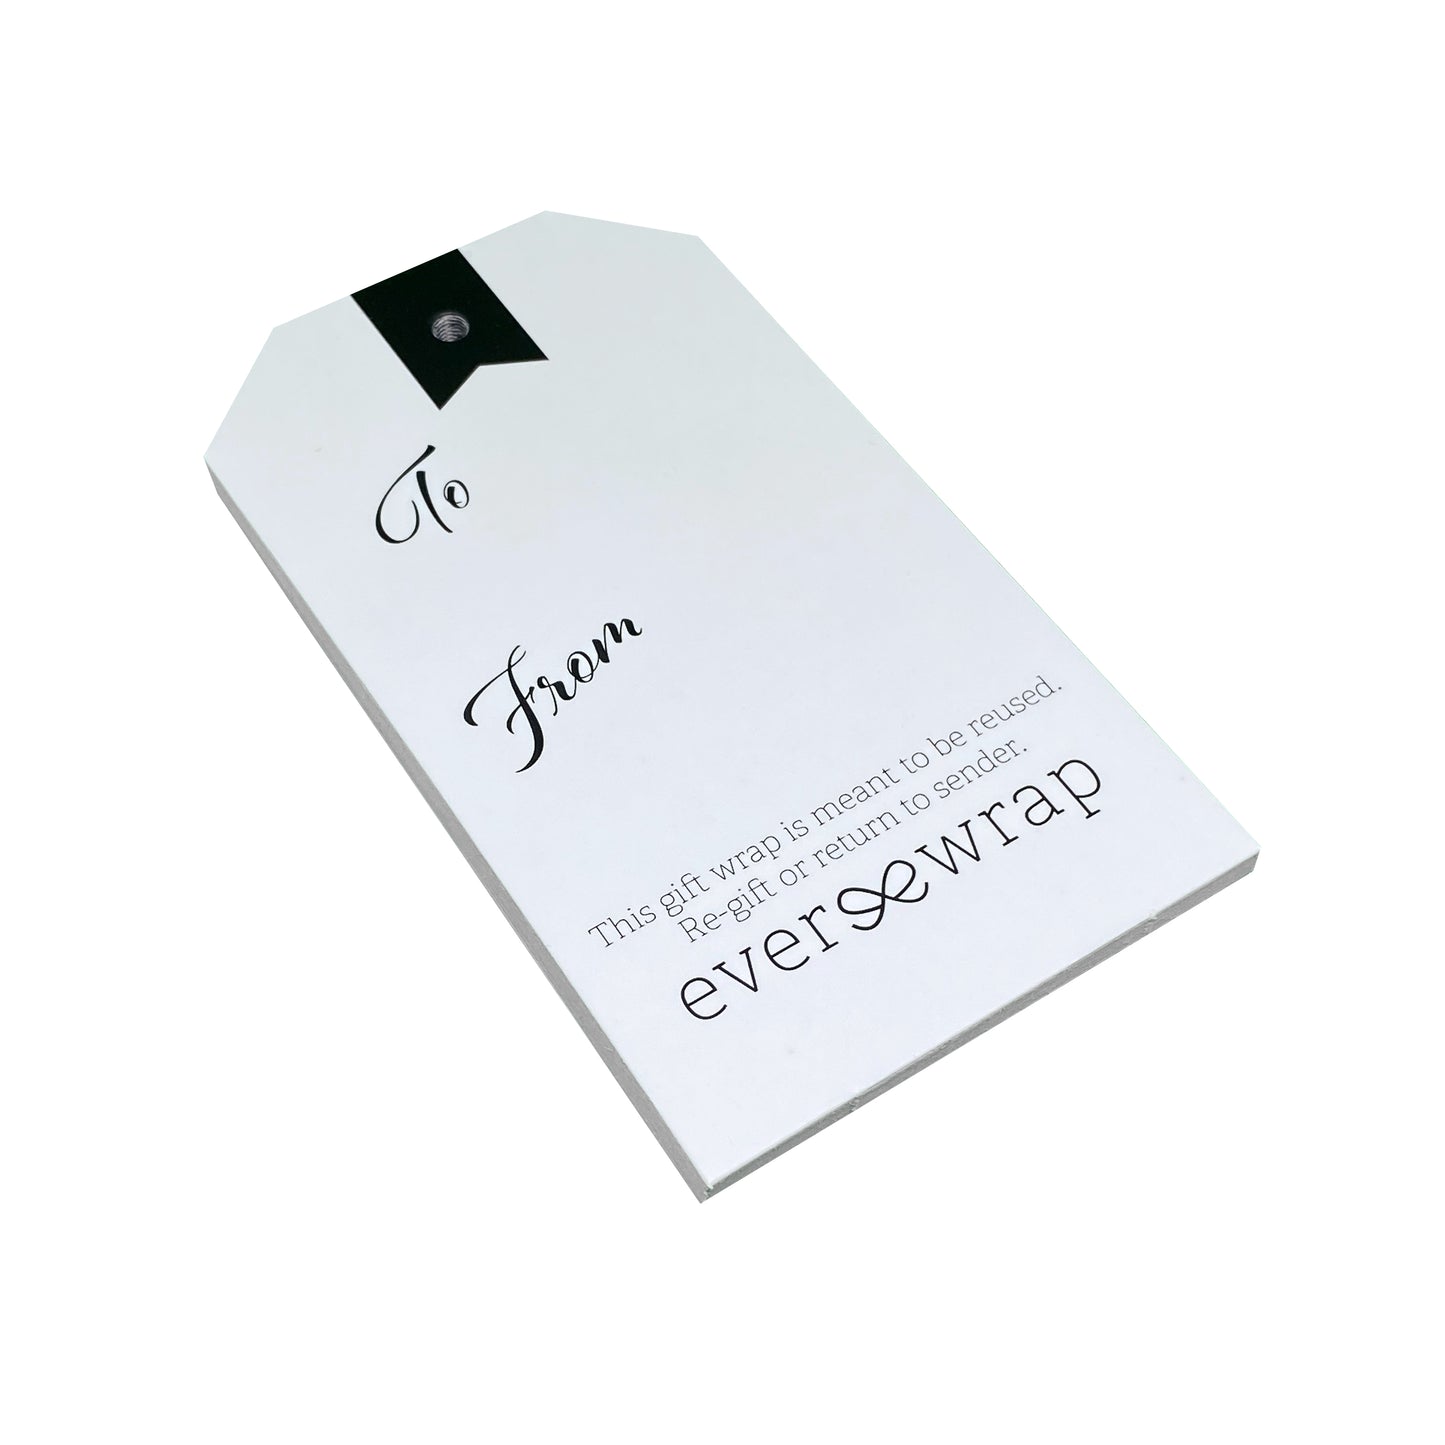 Pack of 12 gift tags in Thick Cardstock, informative for giving reusable giftwrap outside of the home - EverWrap